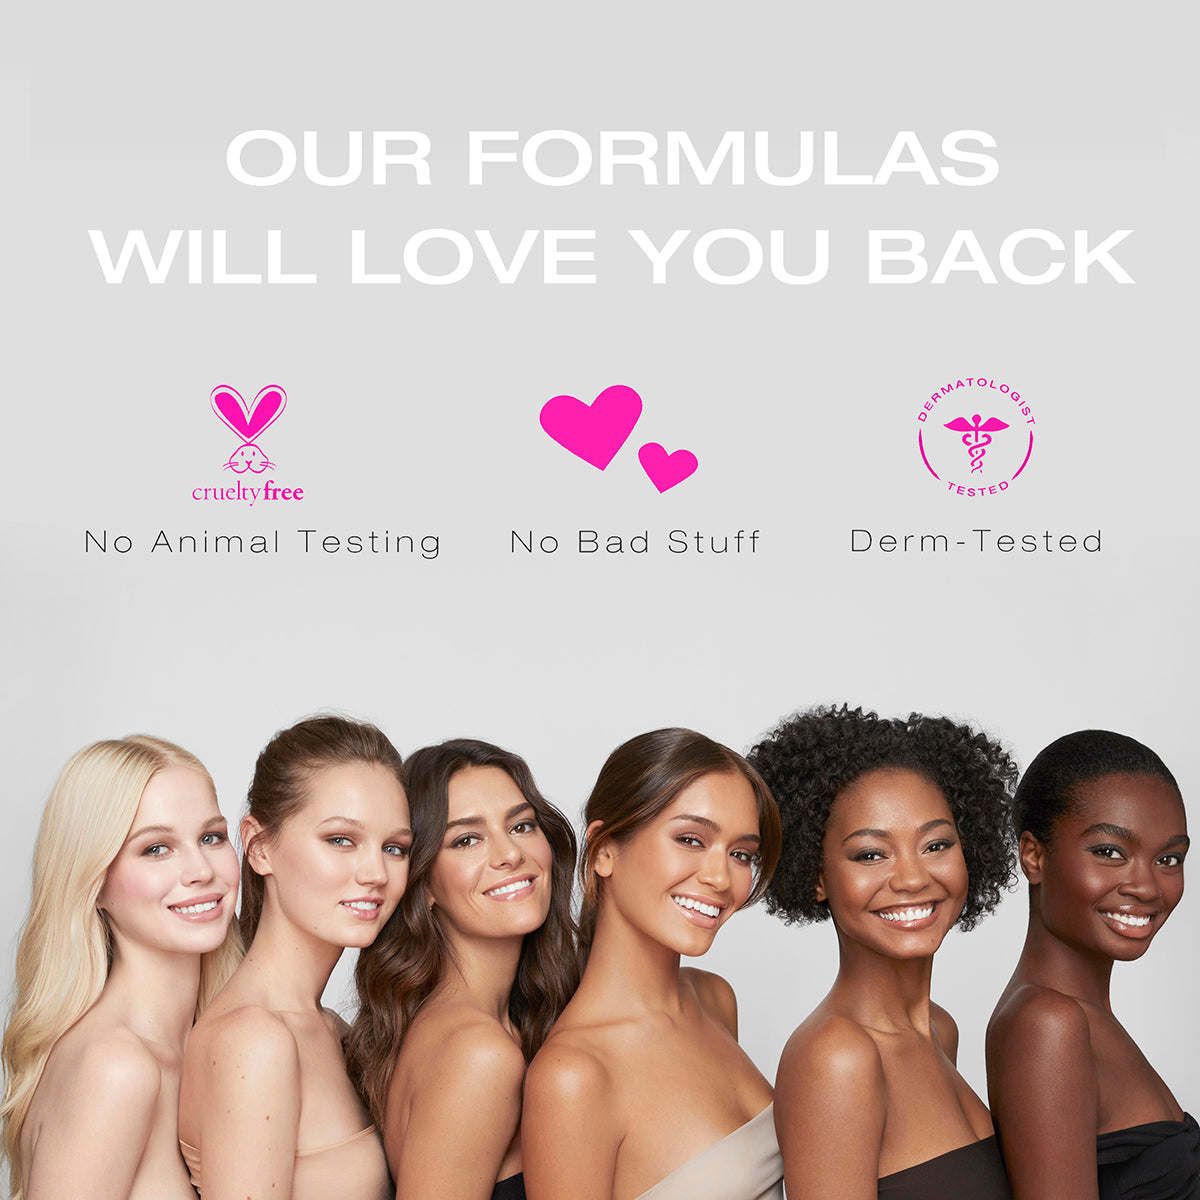 Description of the fold out palette as having no animal testing, no bad stuff, and dermatologist tested